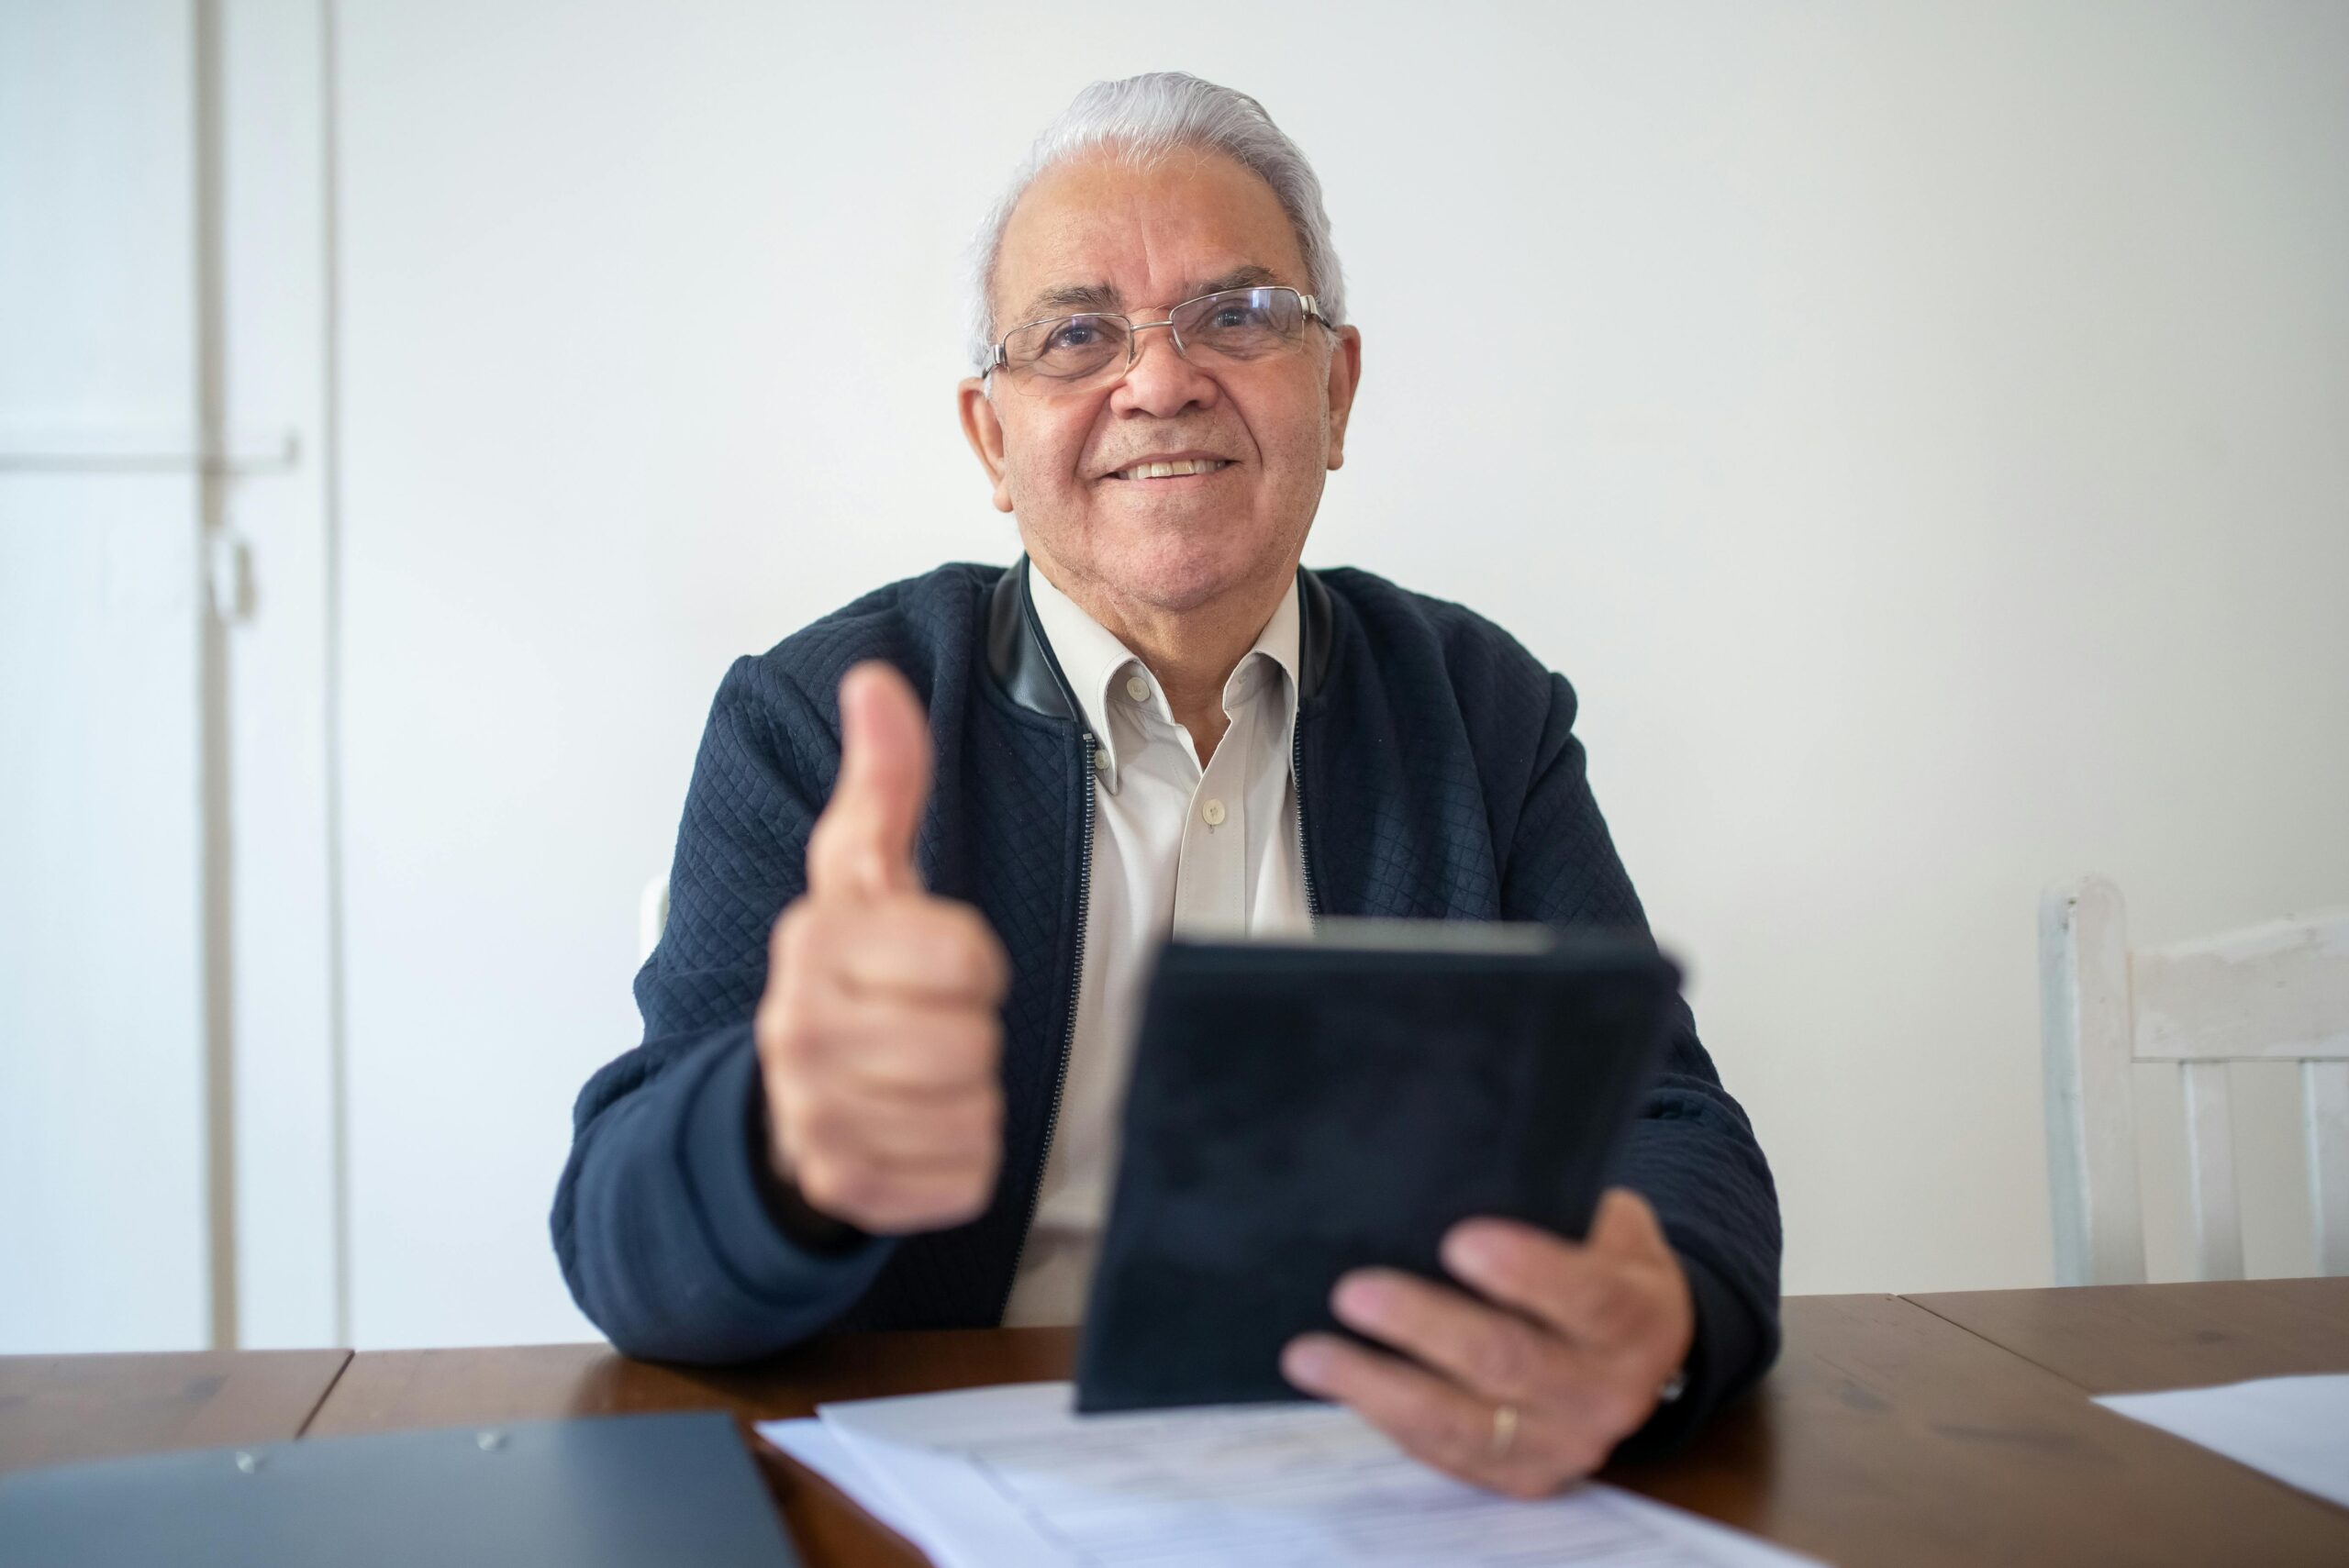 Elderly gentleman reviewing Medicare documents with a smile and thumbs up